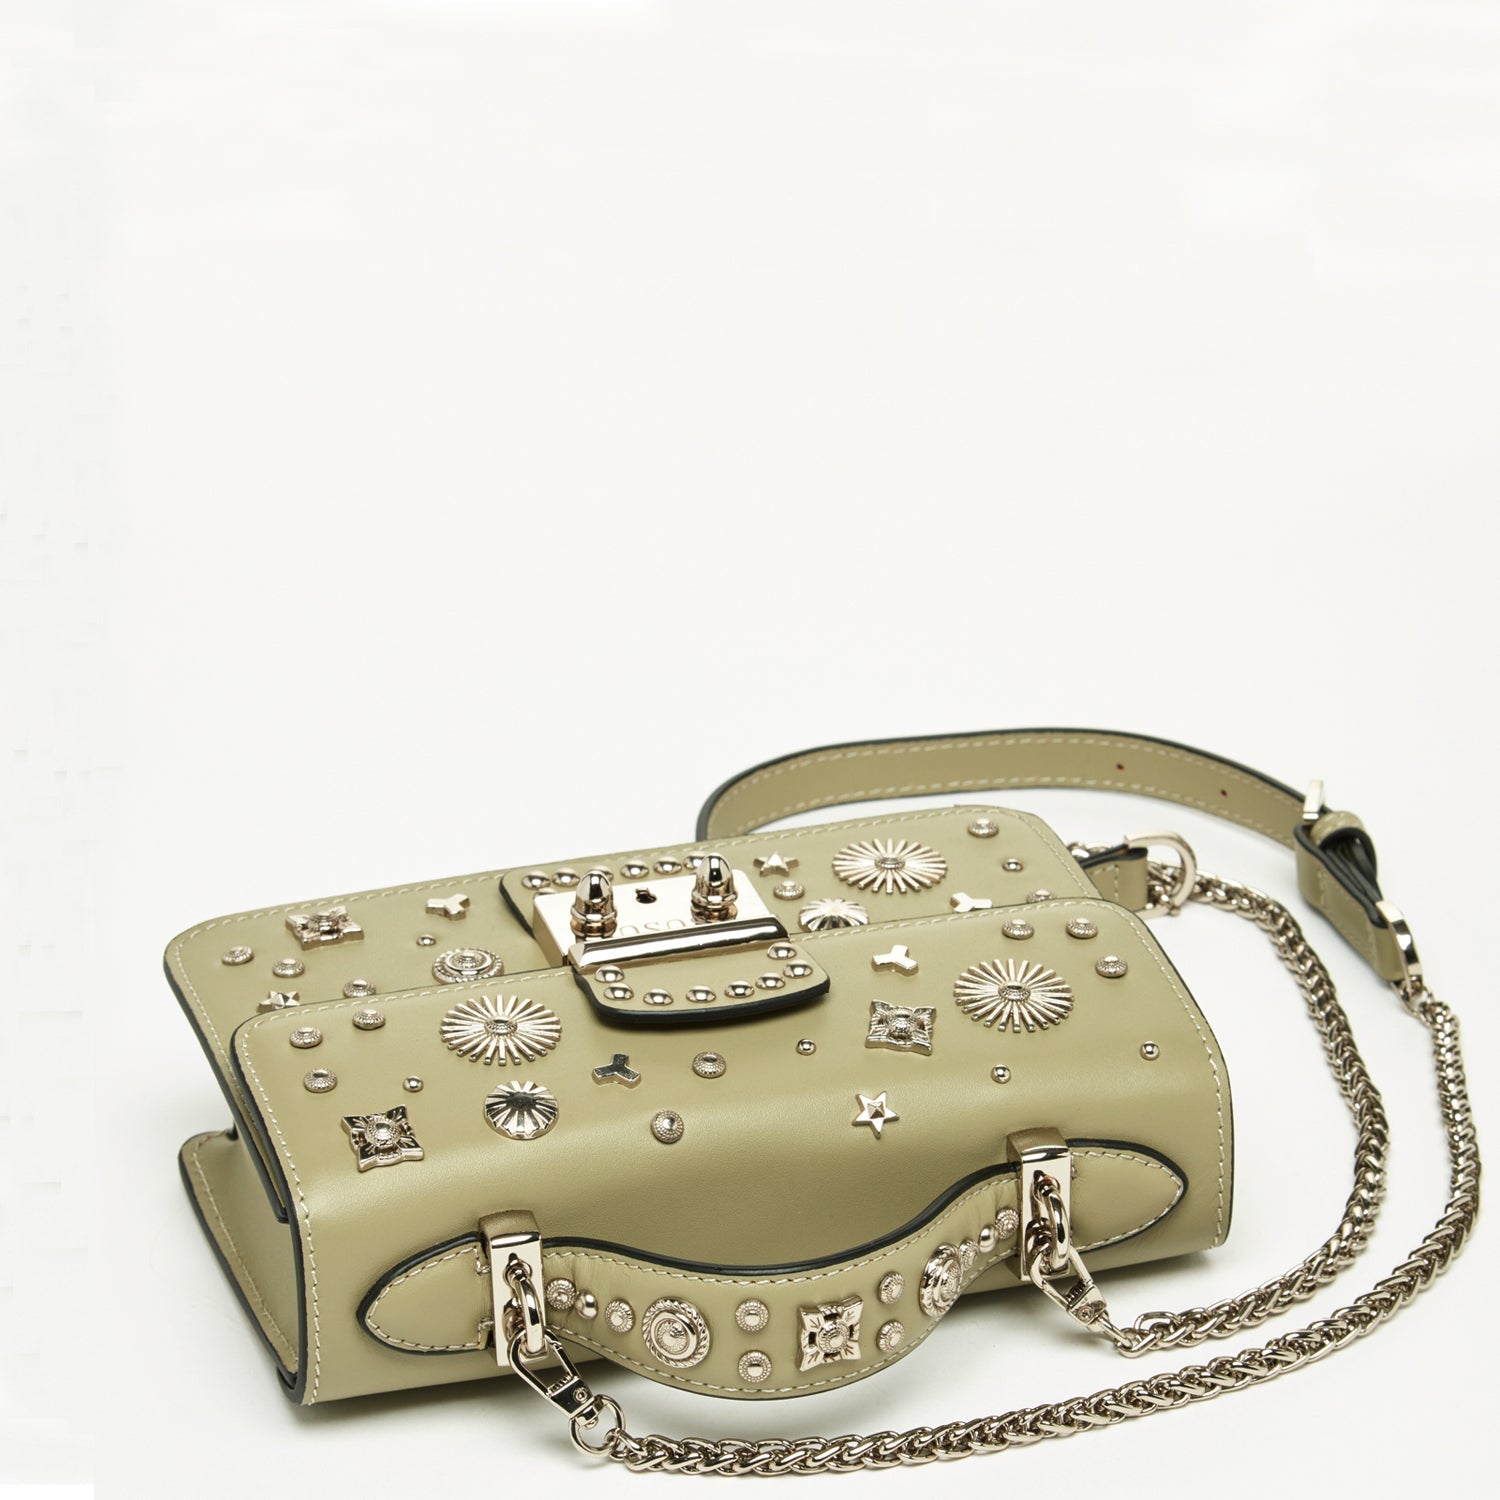 The Hollywood Leather Crossbody Bag Sage Green - Guy Christopher 